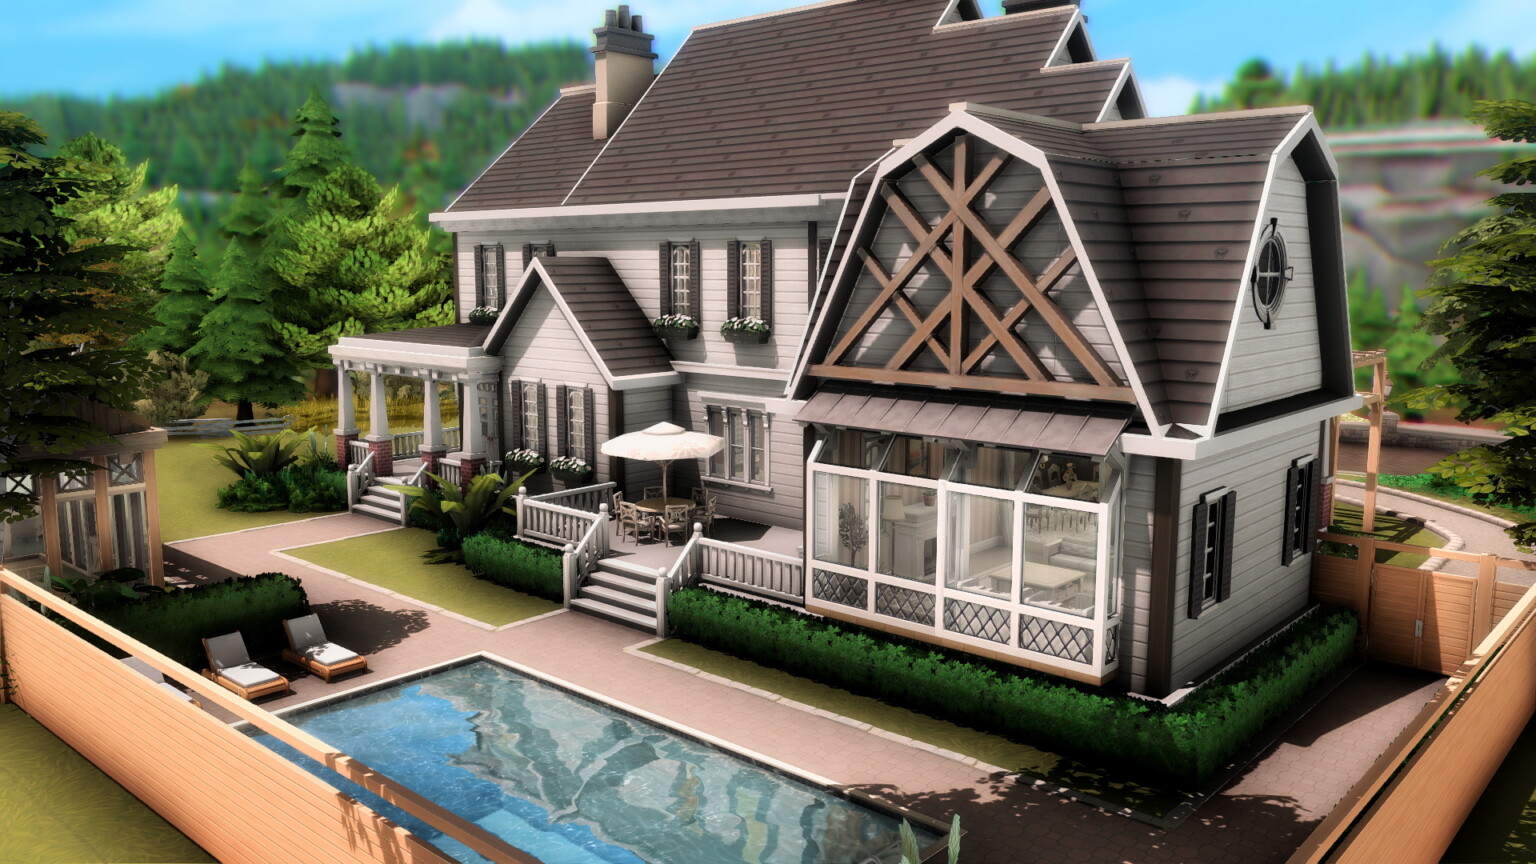 the sims 4 downloadable houses